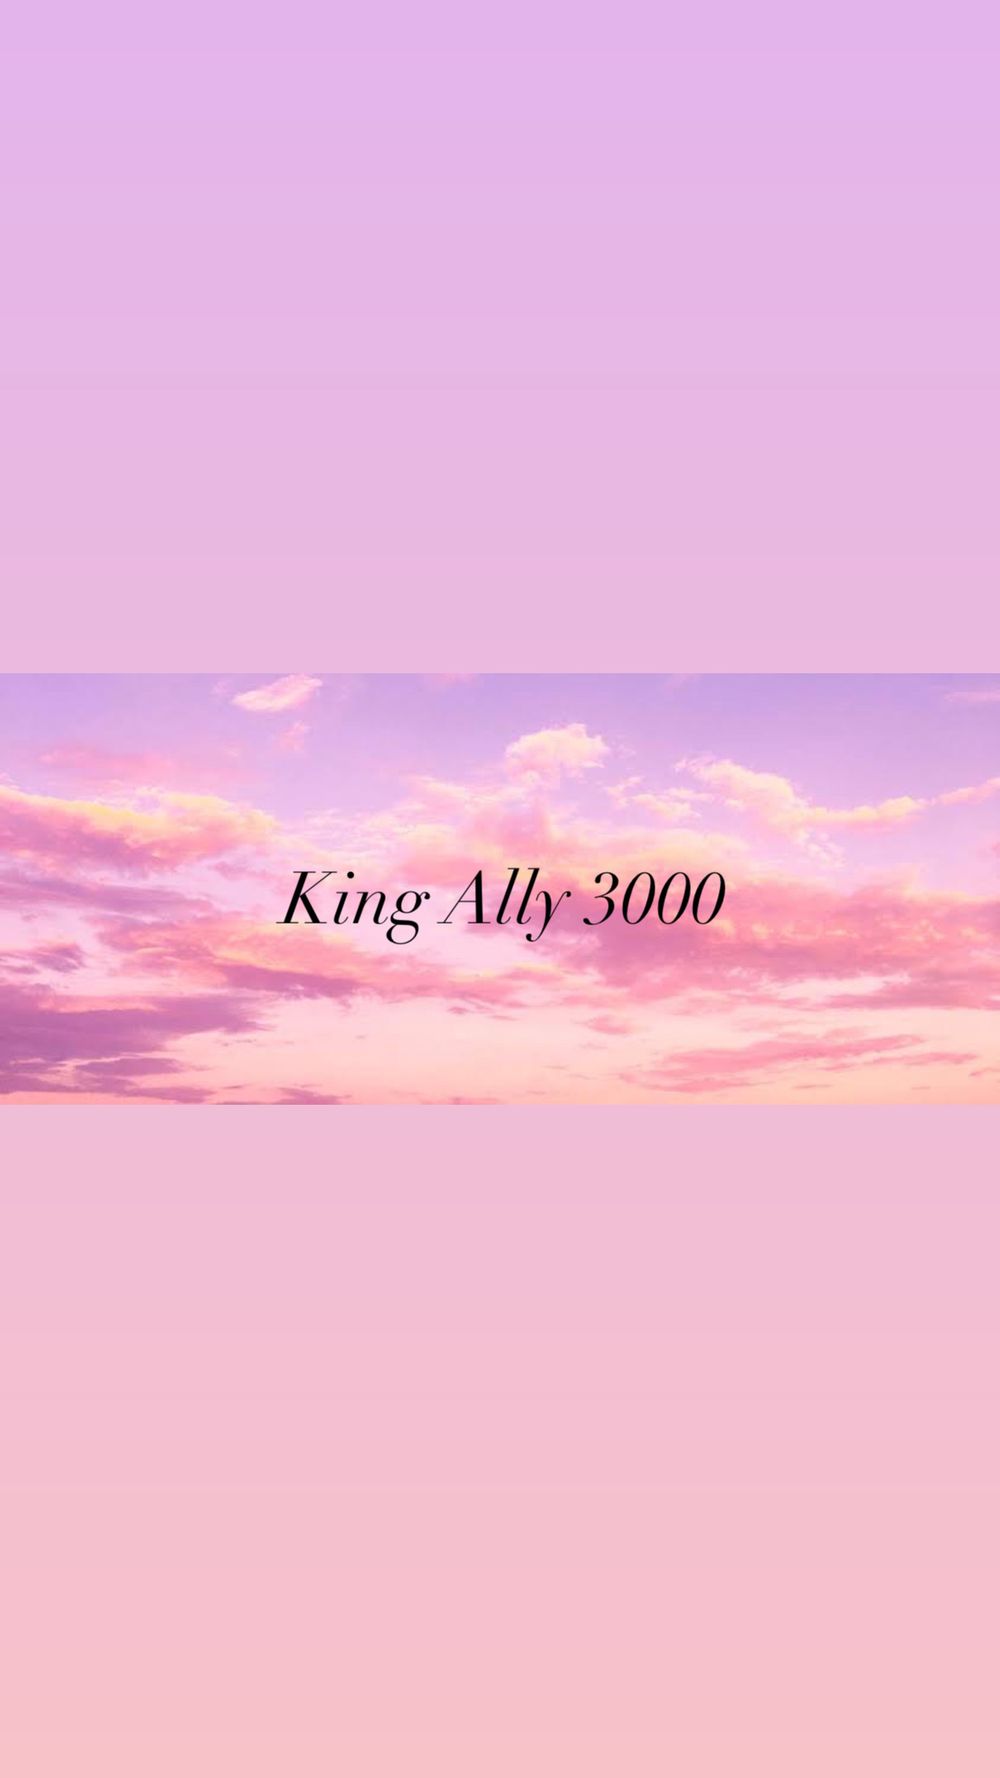 Ally 3000 king Israel Uncovers